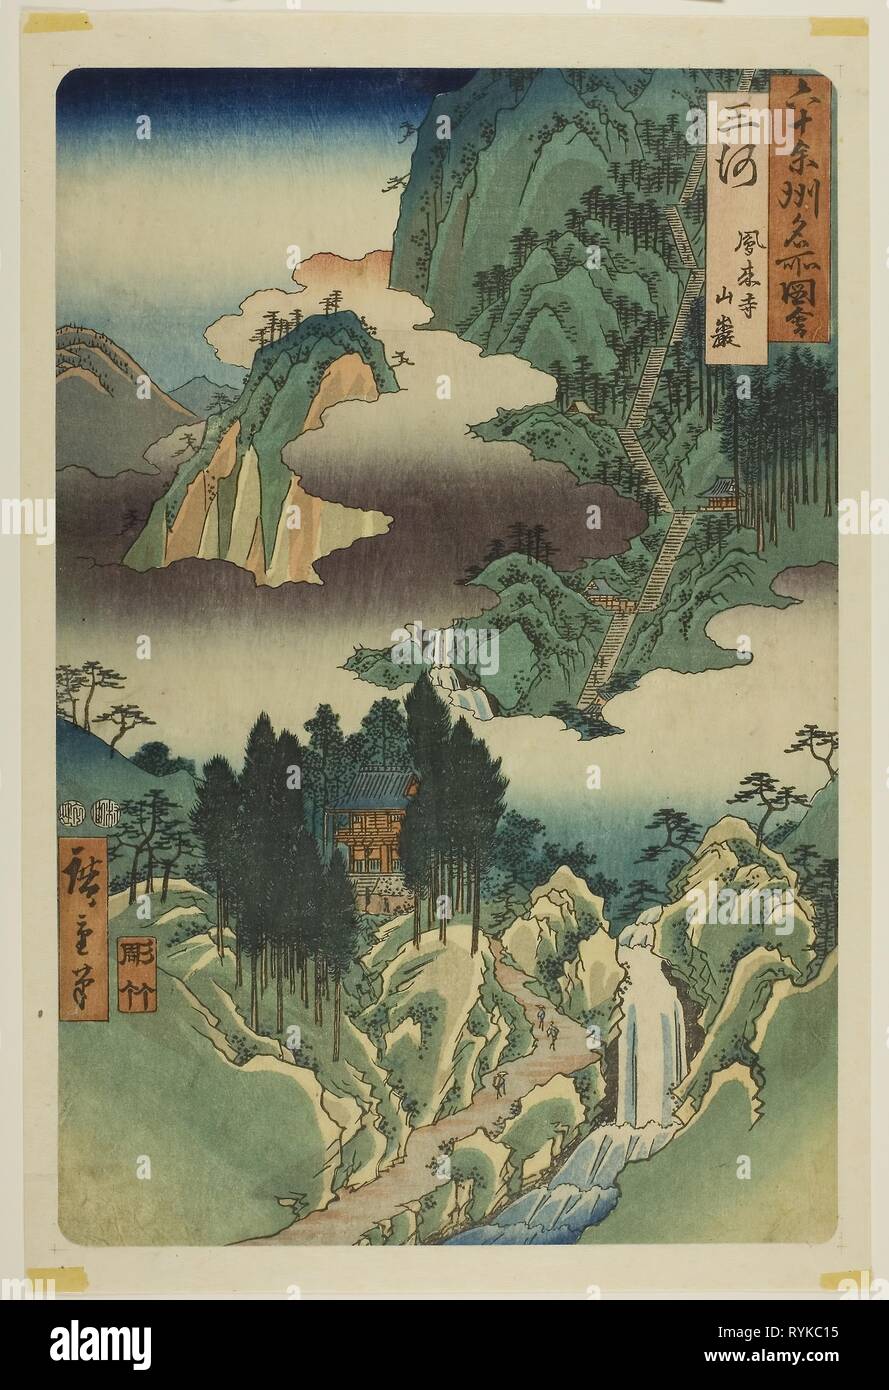 Mikawa Province: Horai Temple in the Mountains (Mikawa, Horaiji sangan), from the series 'Famous Places in the Sixty-odd Provinces (Rokujuyoshu meisho zue)'. Utagawa Hiroshige ?? ??; Japanese, 1797-1858. Date: 1853. Dimensions: . Color woodblock print; oban. Origin: Japan. Museum: The Chicago Art Institute, Chicago, USA. Author: Utagawa Hiroshige. ANDO HIROSHIGE. Stock Photo